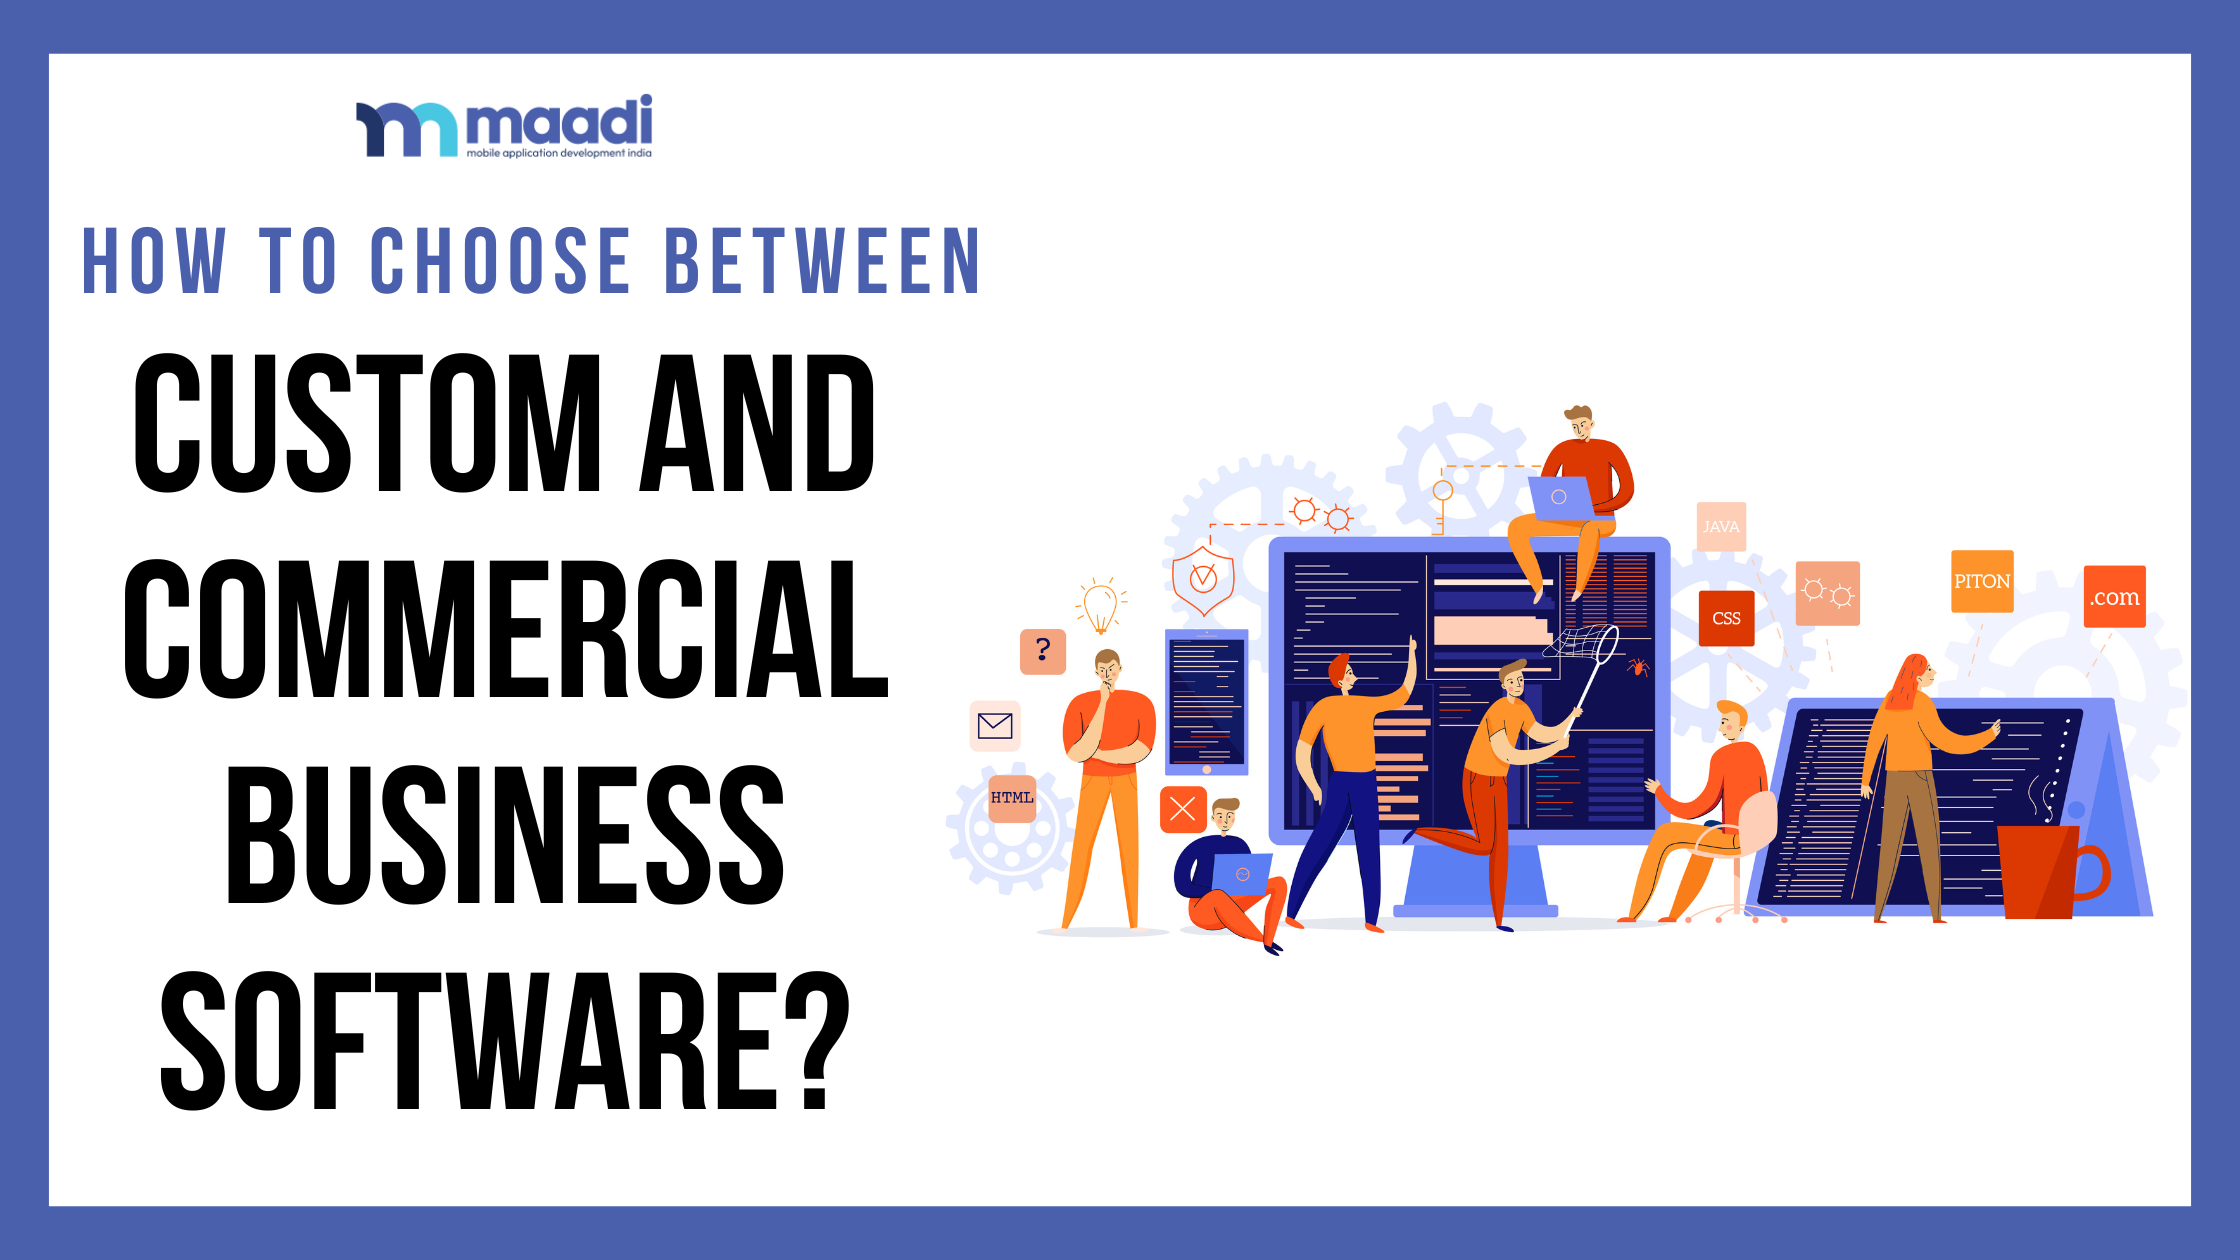 How to Choose Between Custom and Commercial Business Software?